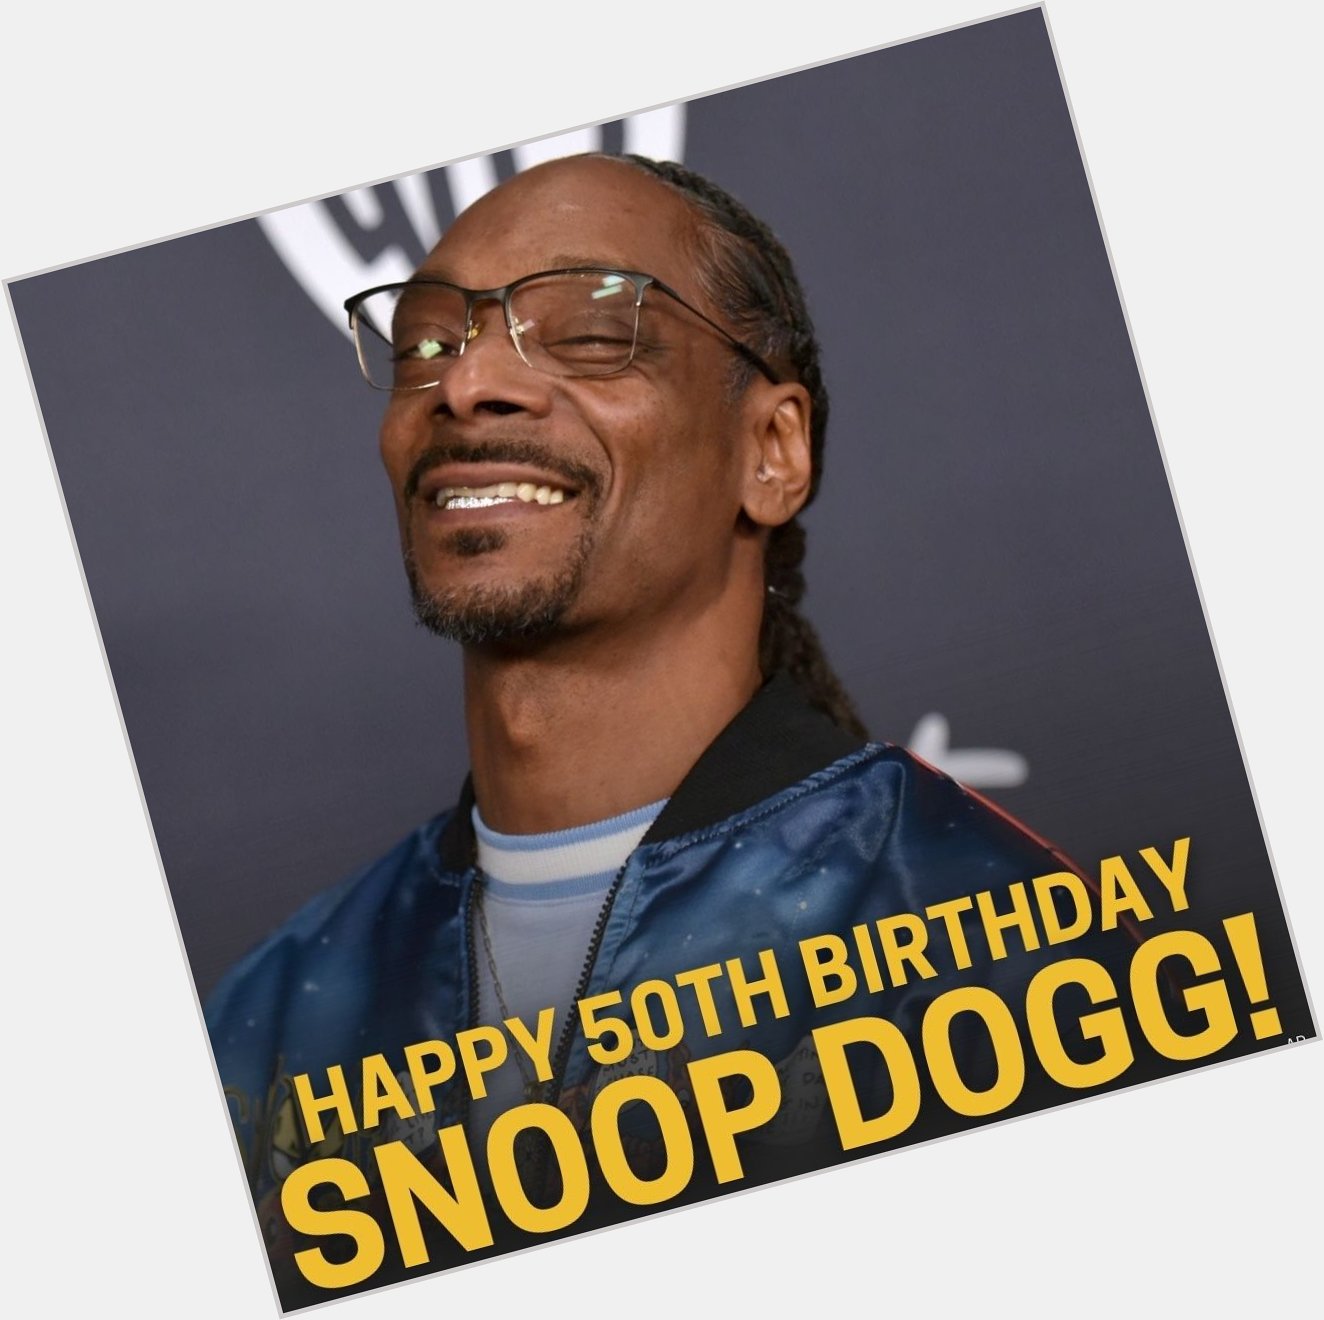 Mr. D-O-double-G is the big five-oh today! Happy Birthday Snoop Dogg! 